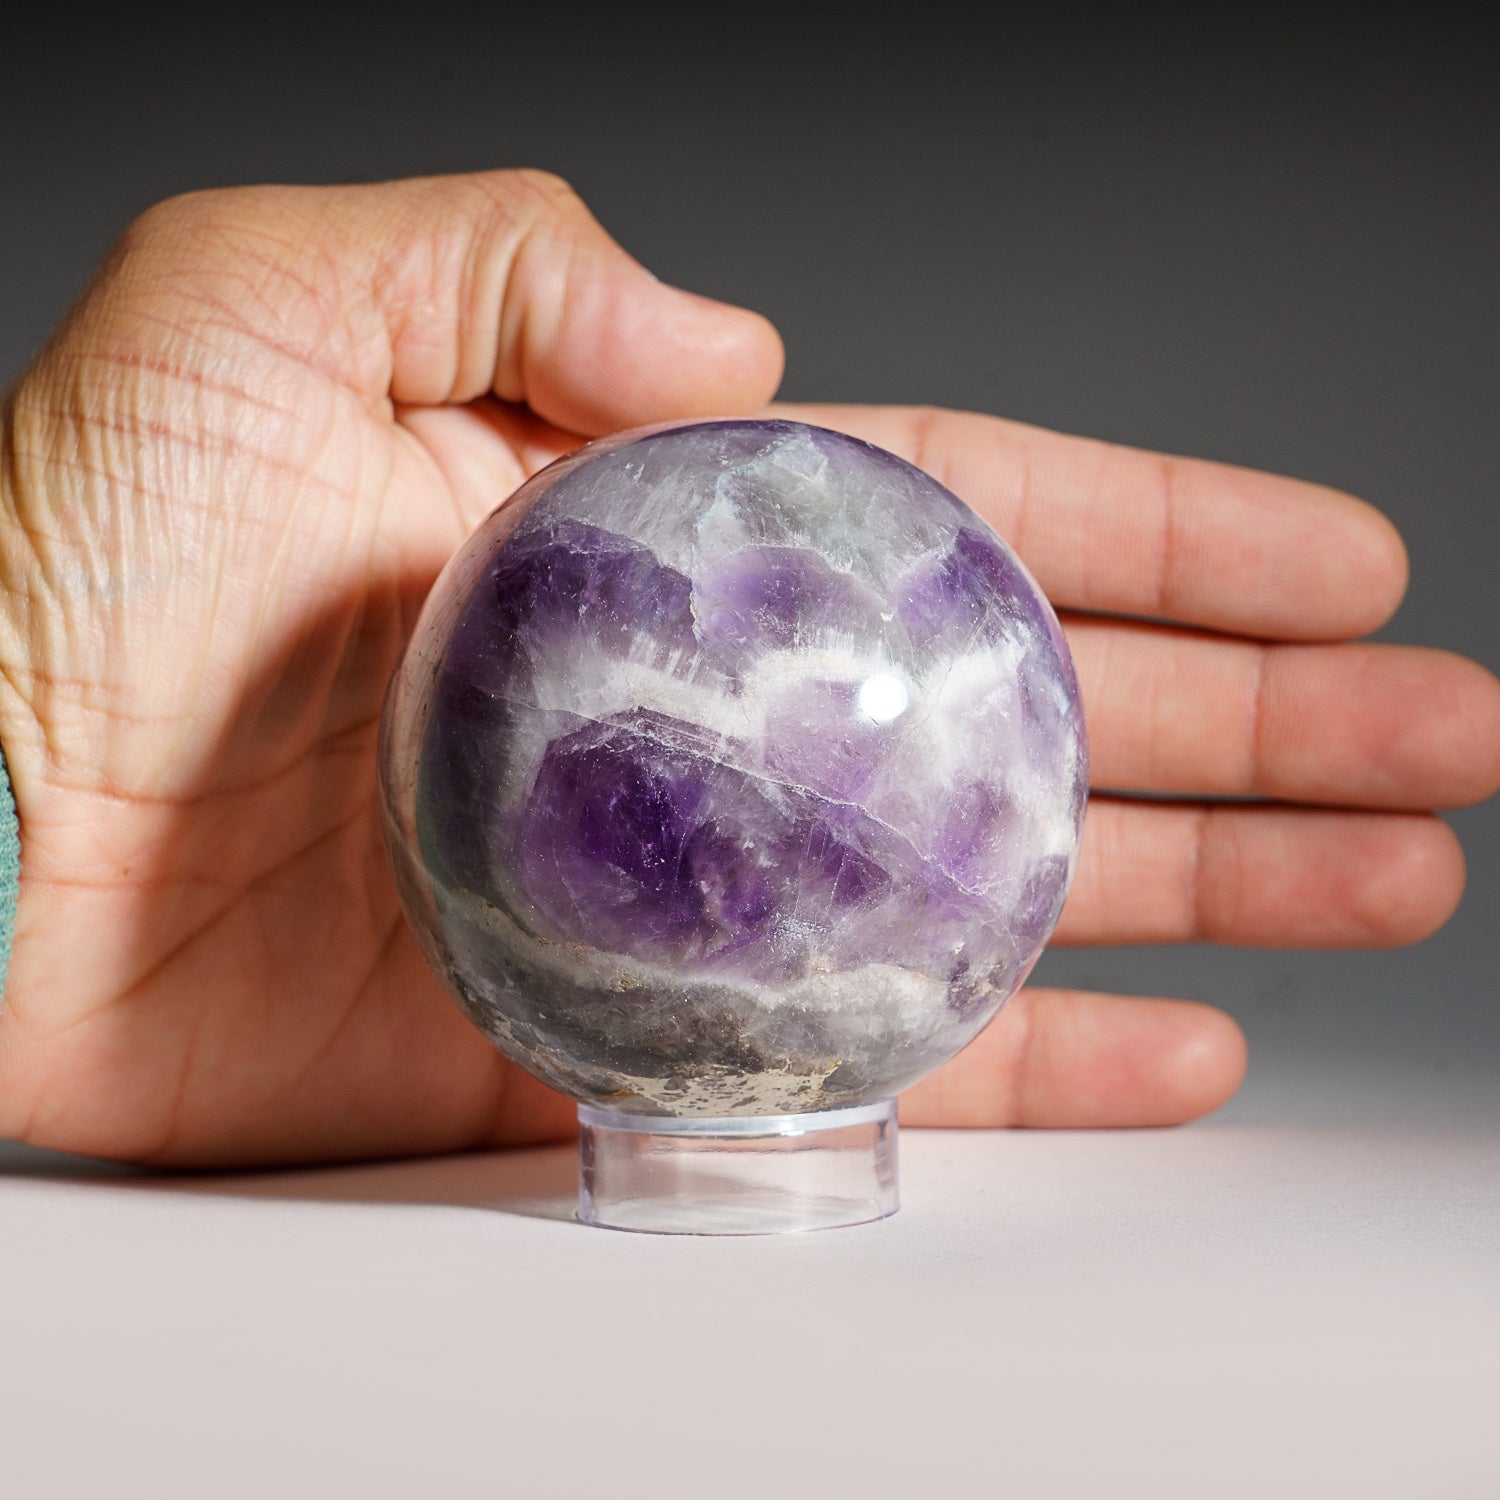 Polished Chevron Amethyst Sphere from Brazil (3", 483.2 gramss)